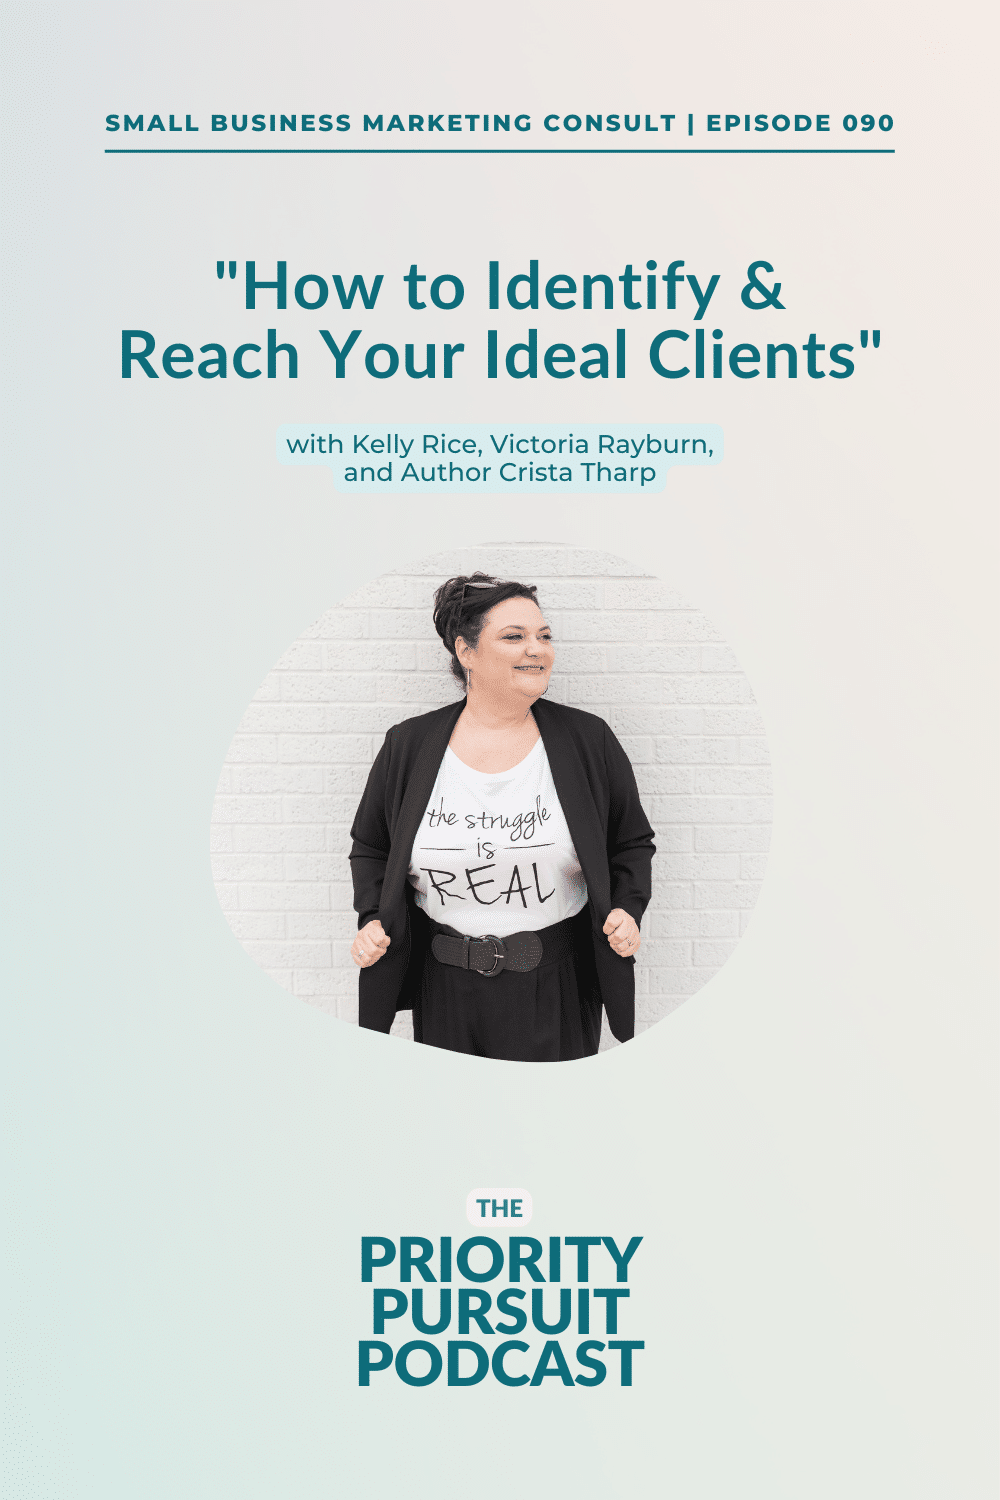 How to Identify & Reach Your Ideal Clients